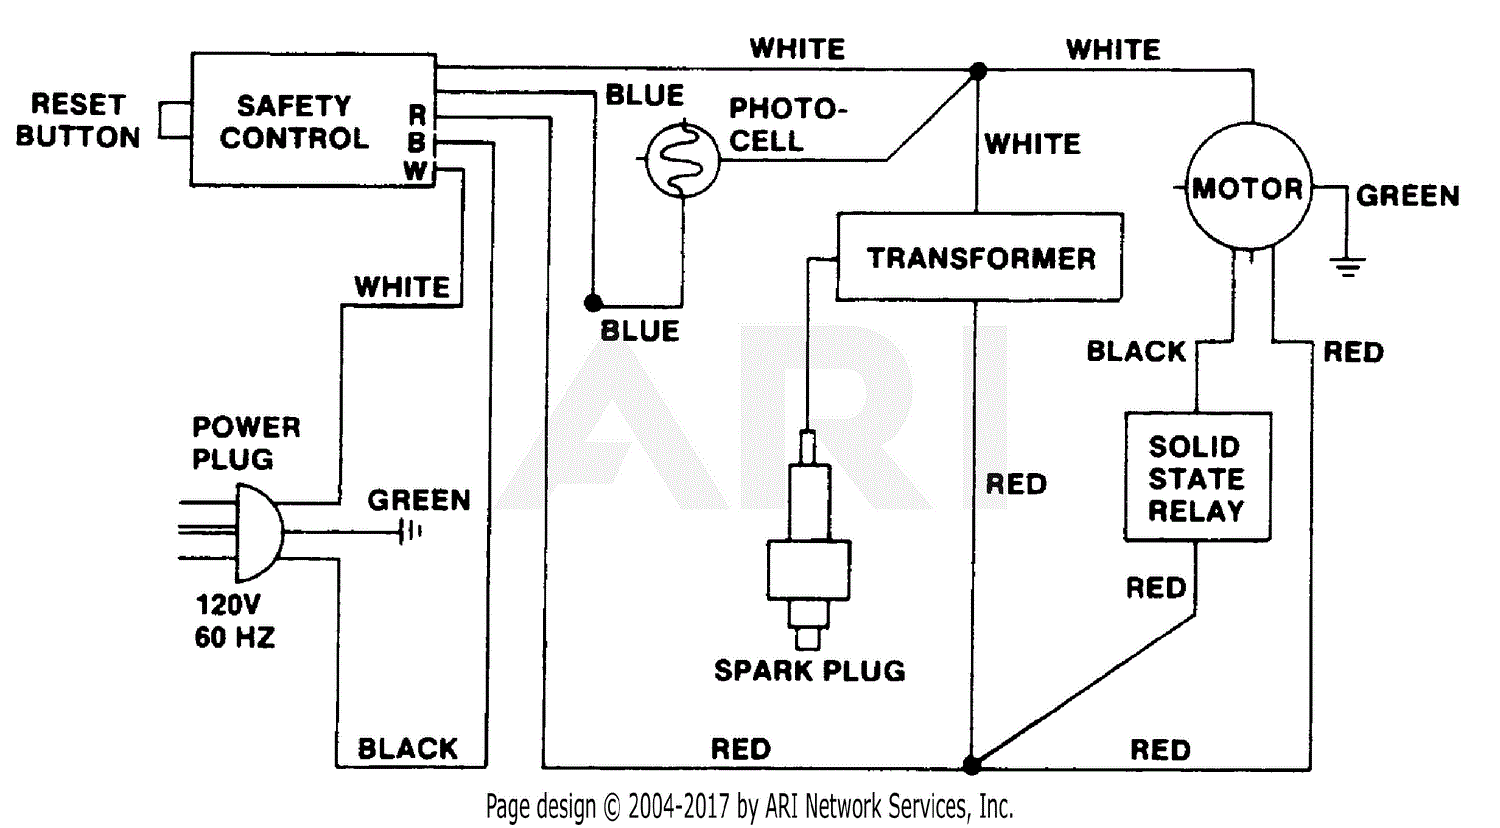 41 Motor Space Heater Connection Diagram - Wiring Diagram Online Source